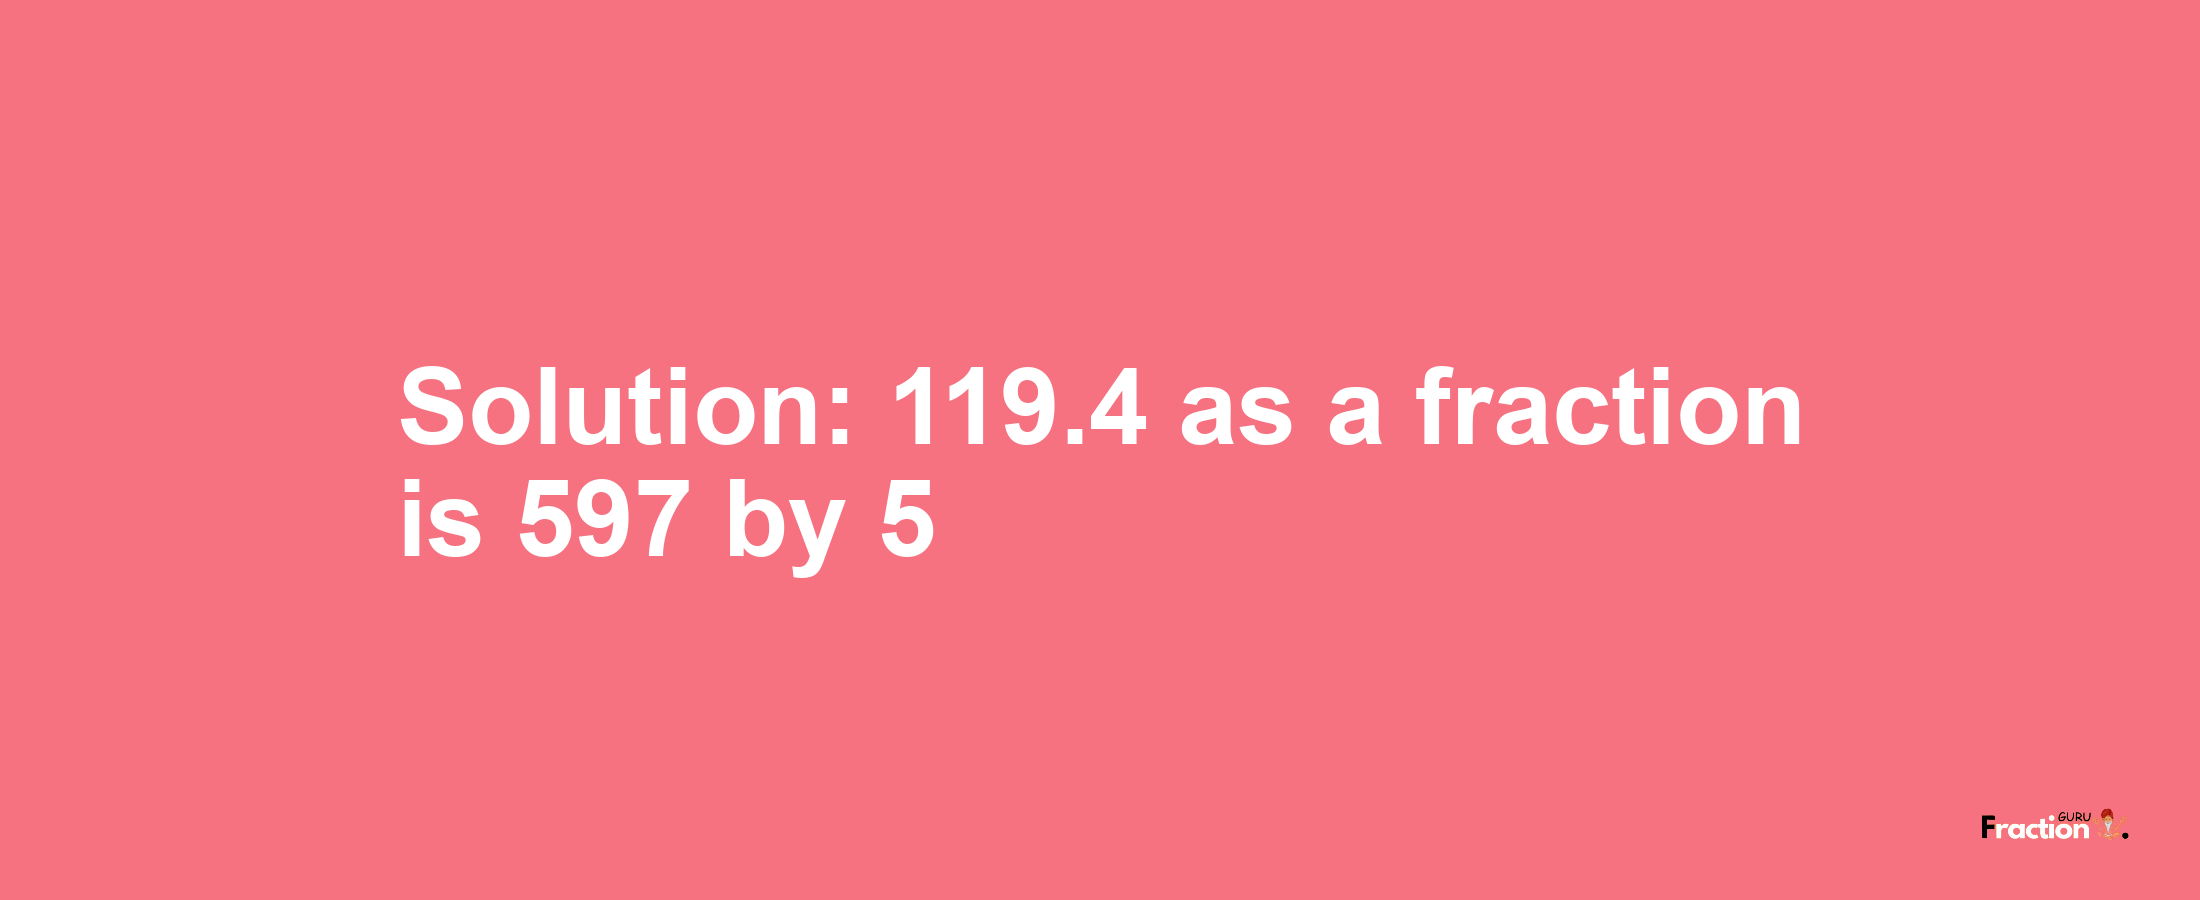 Solution:119.4 as a fraction is 597/5